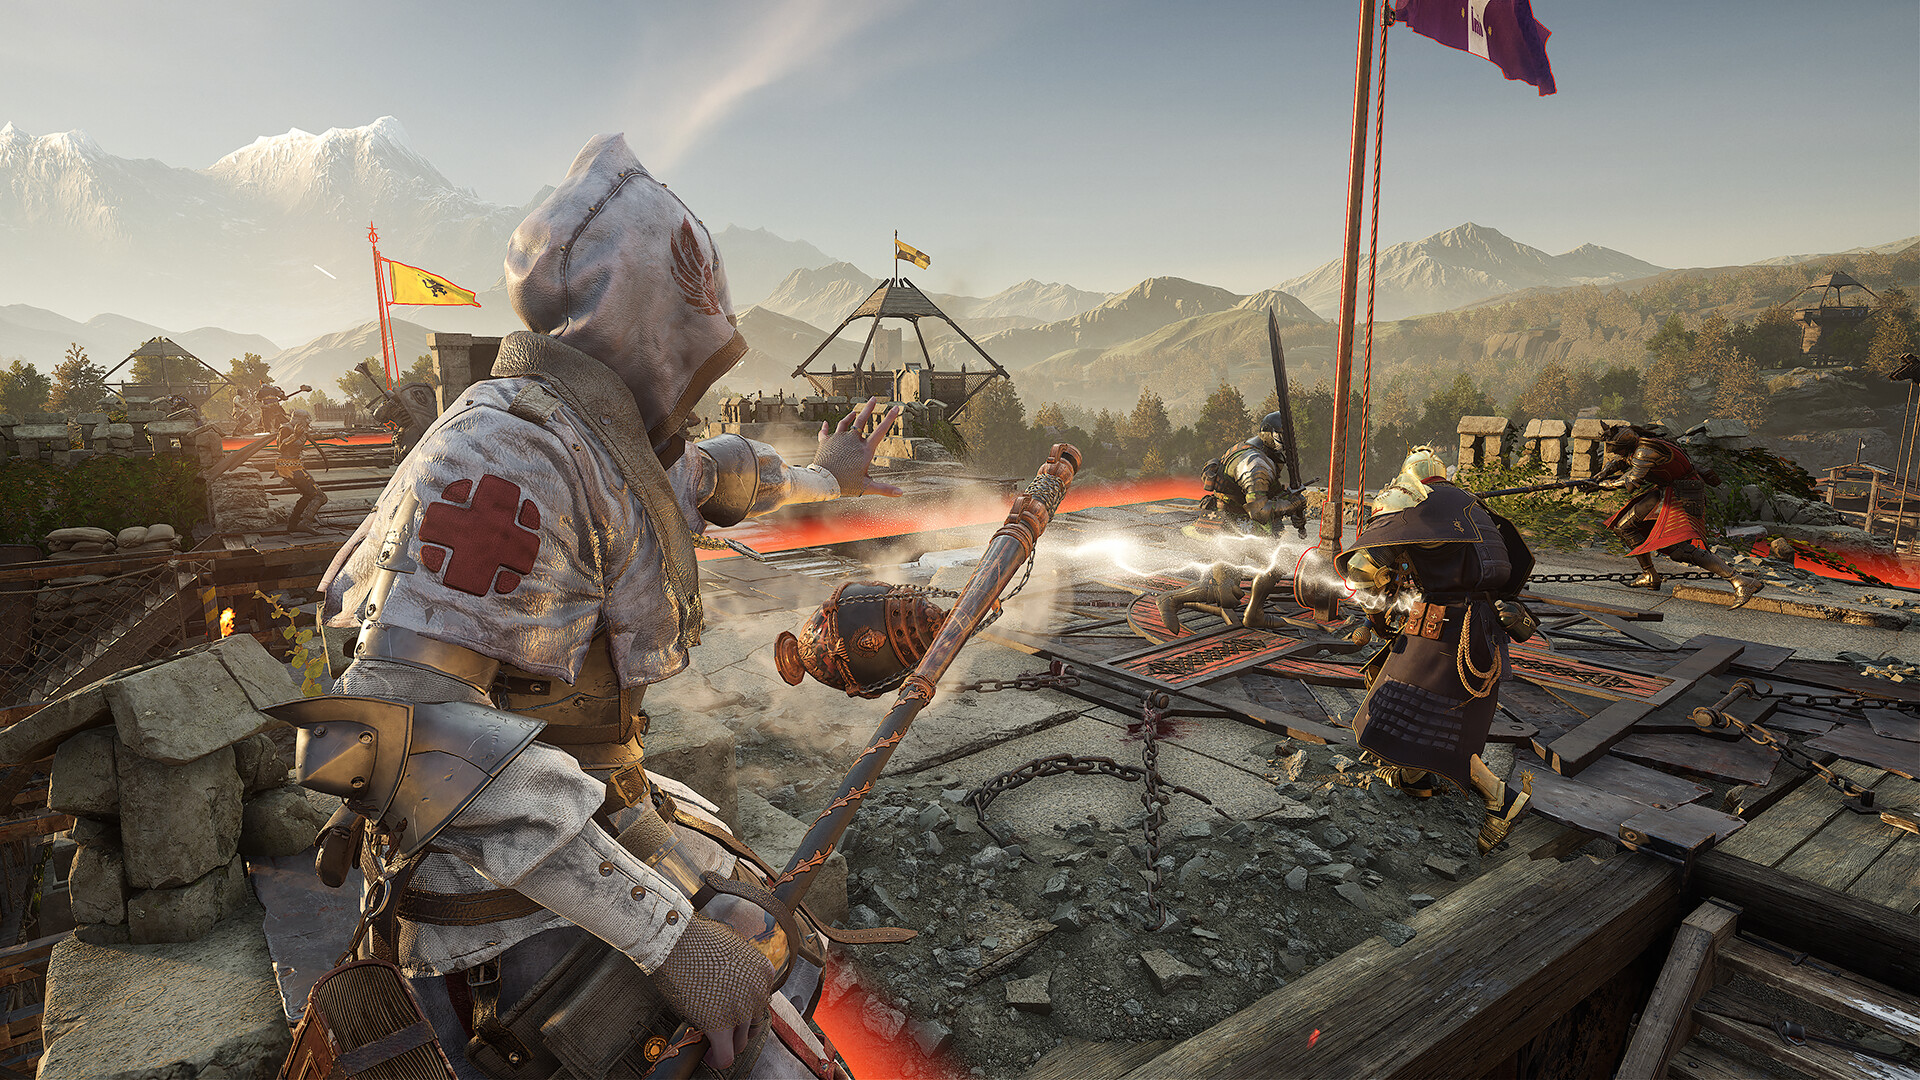 Warhaven – medieval battles come to life at Steam Next Fest